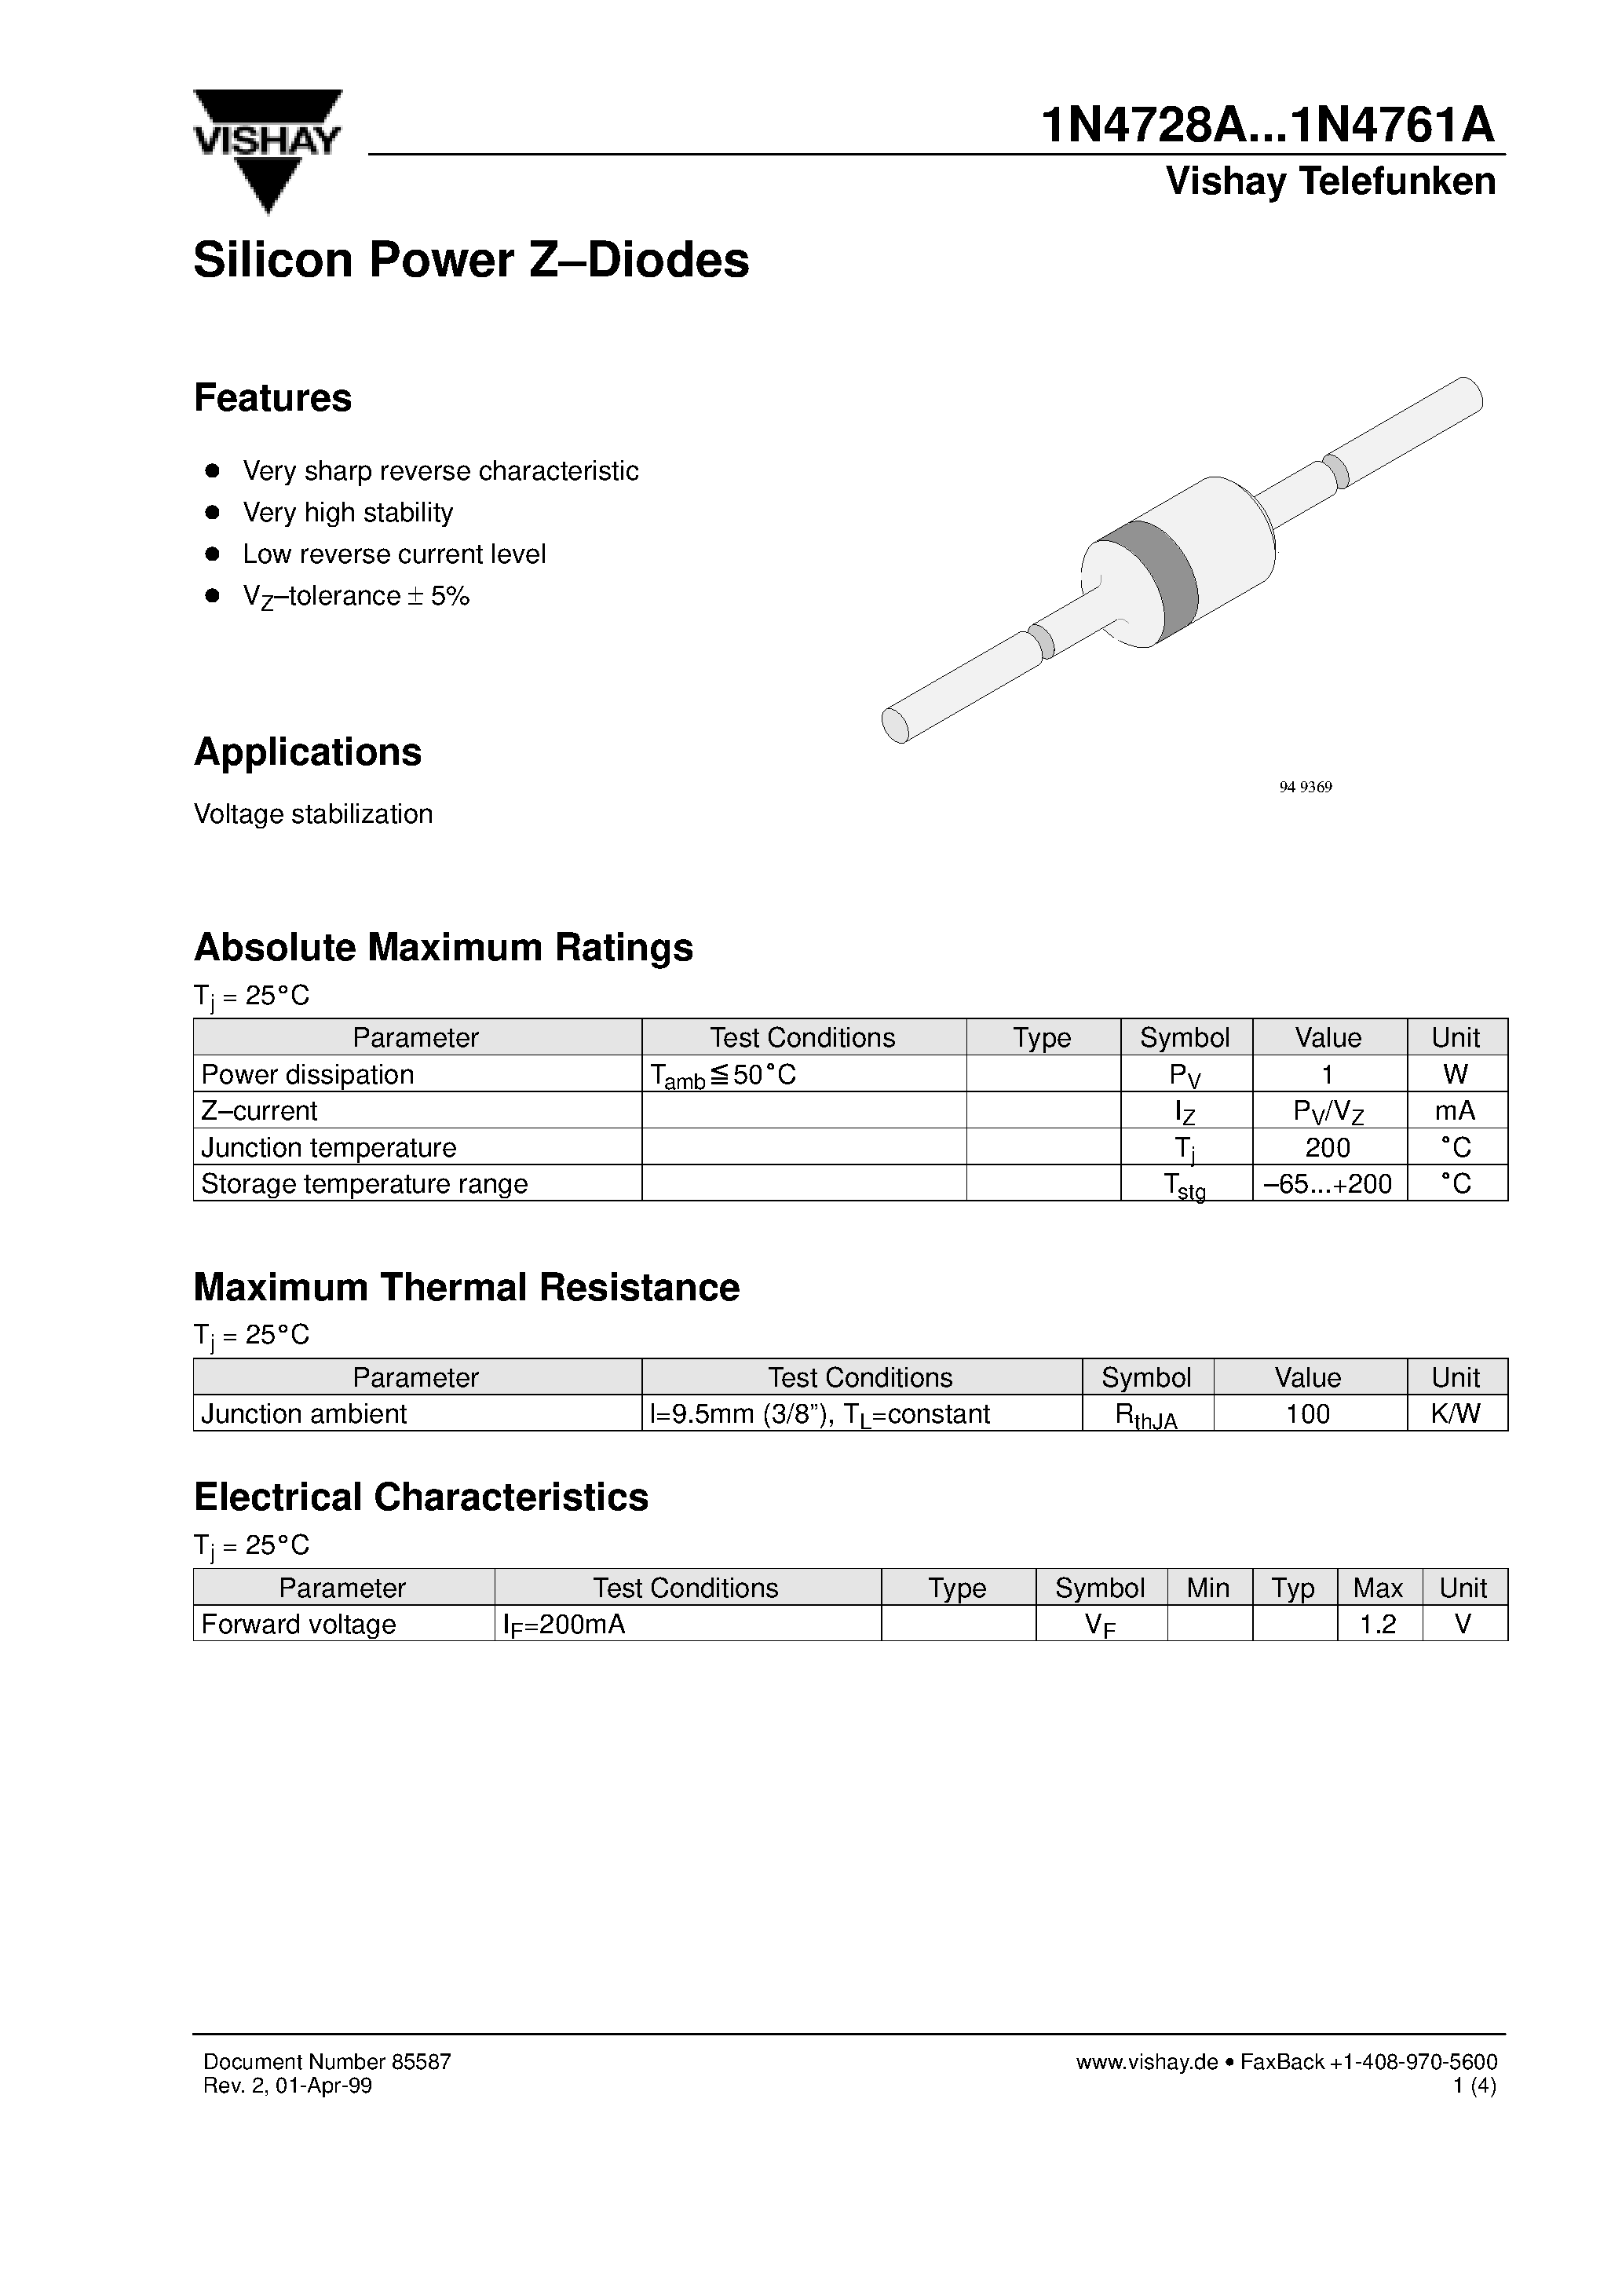 Datasheet 1N4730A - Silicon Power Z-Diodes page 1